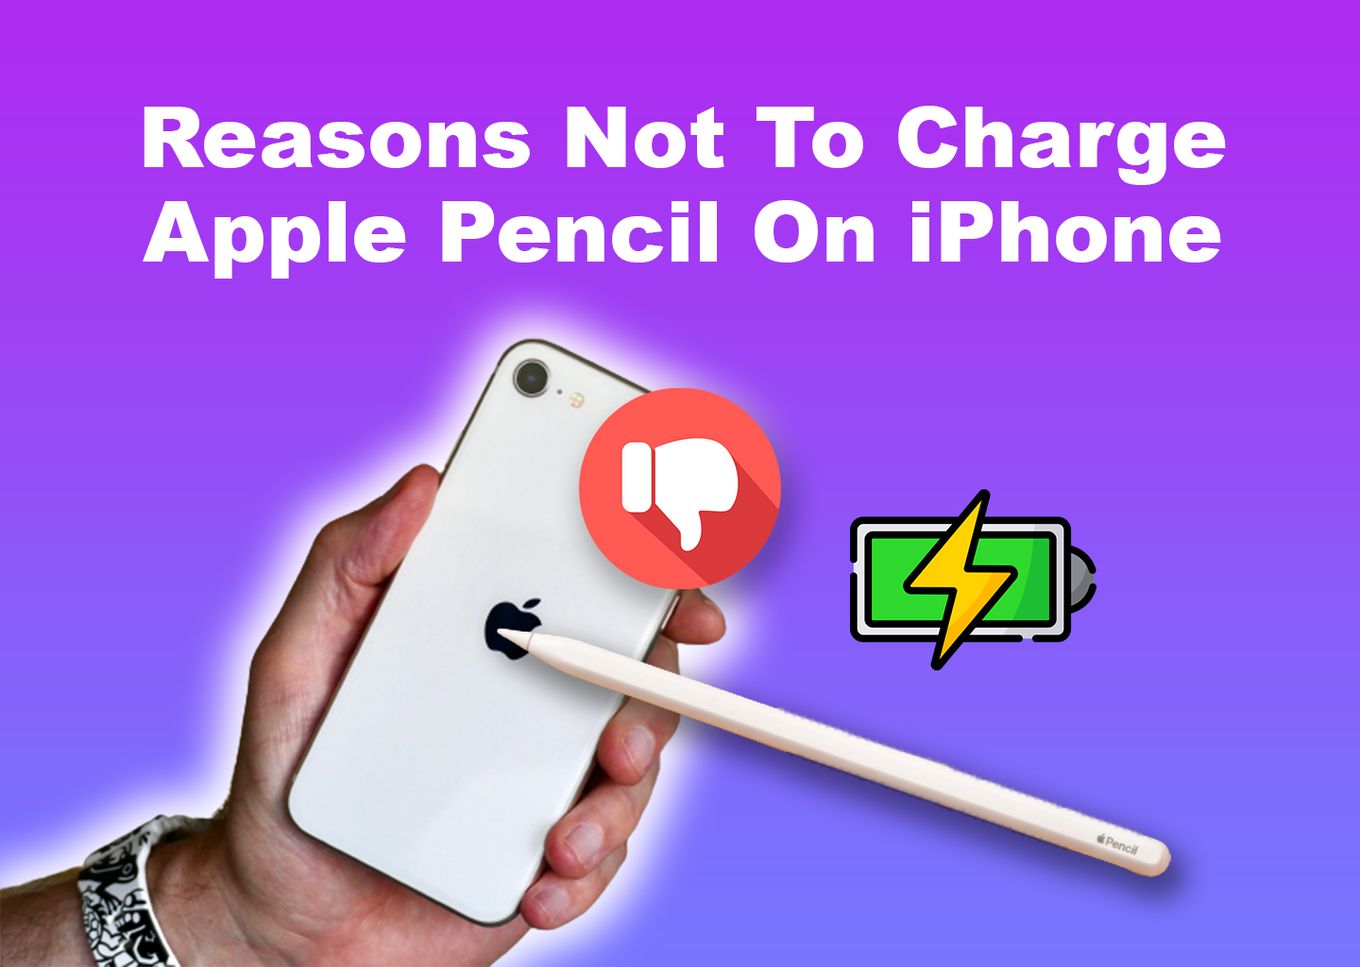 Reasons Not To Charge Apple Pencil On iPhone